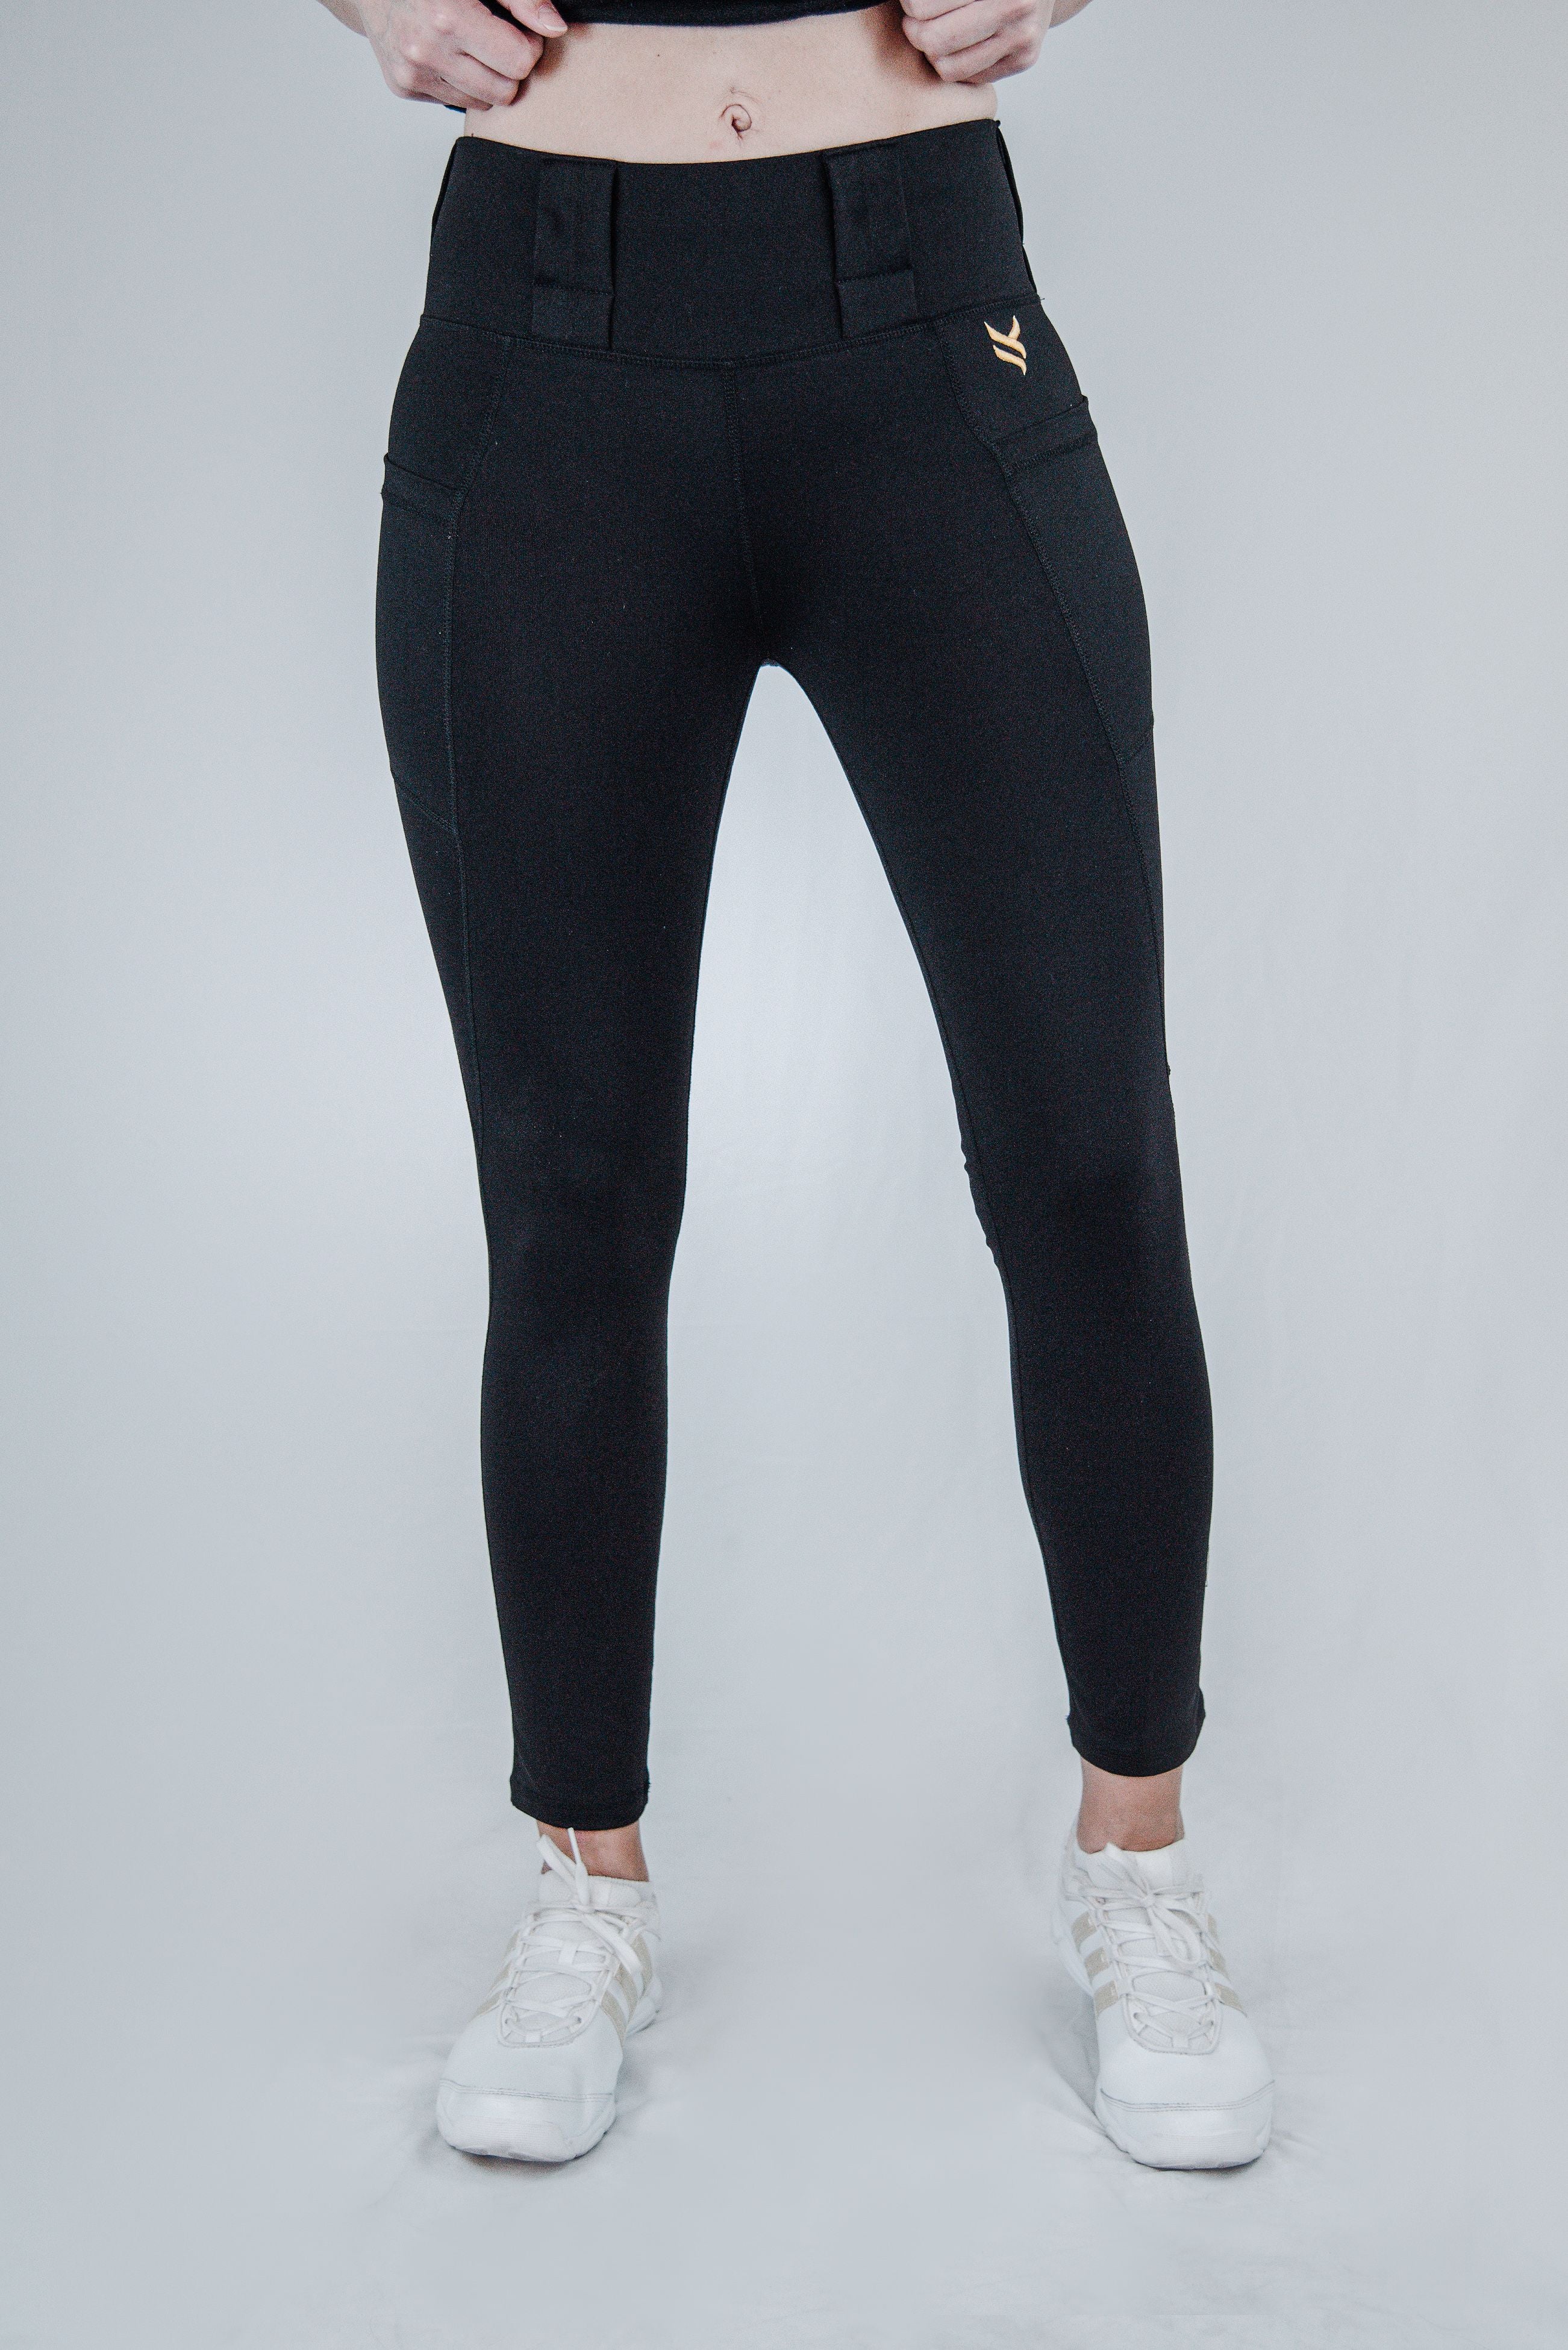 Buy all kinds of workout legging without seam at the best price - Arad  Branding